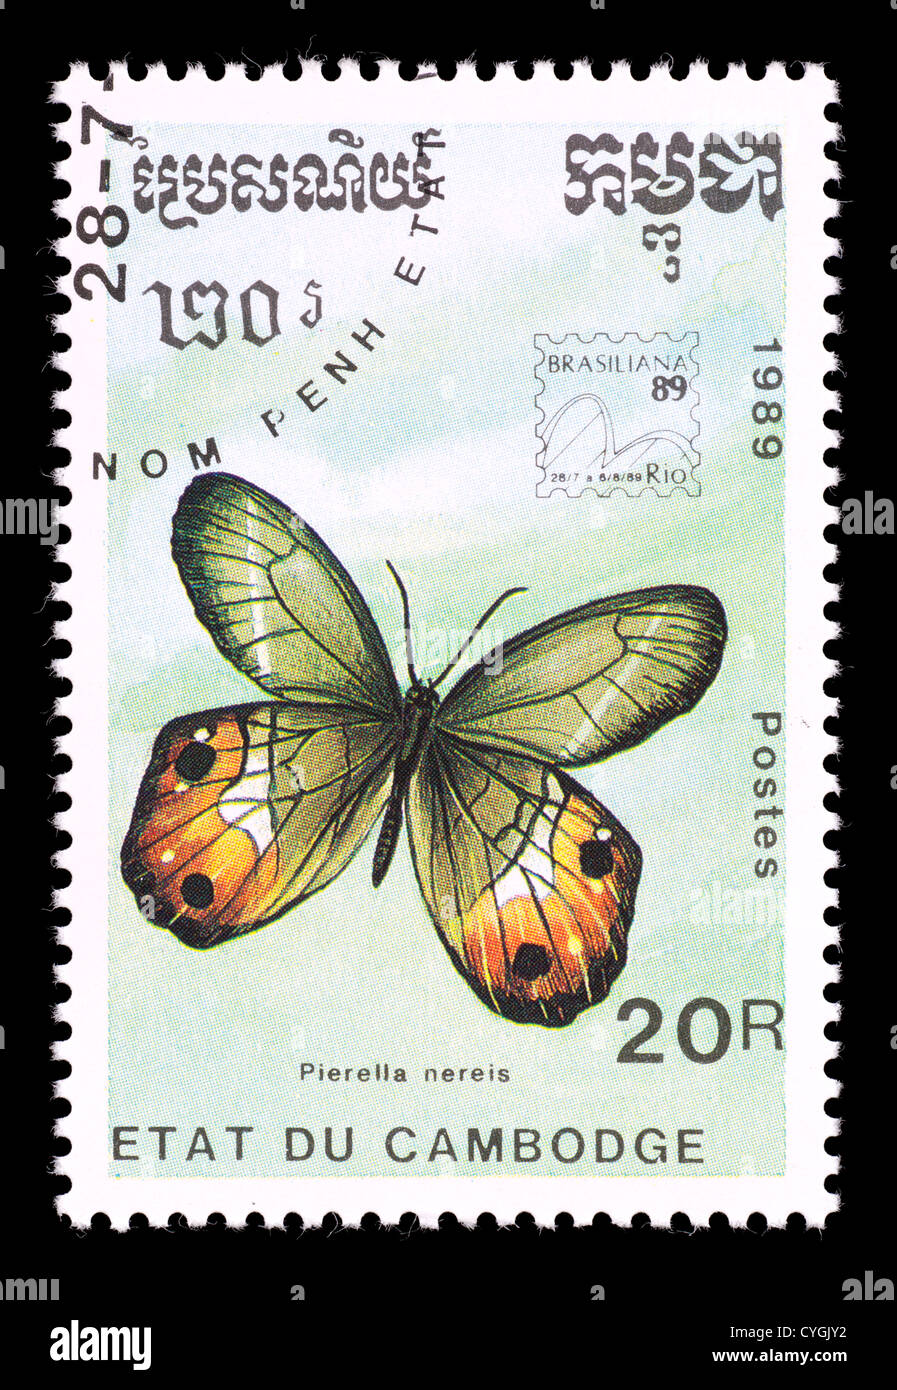 Postage stamp from Cambodia depicting a tropical butterfly (Pierella nereis ) Stock Photo